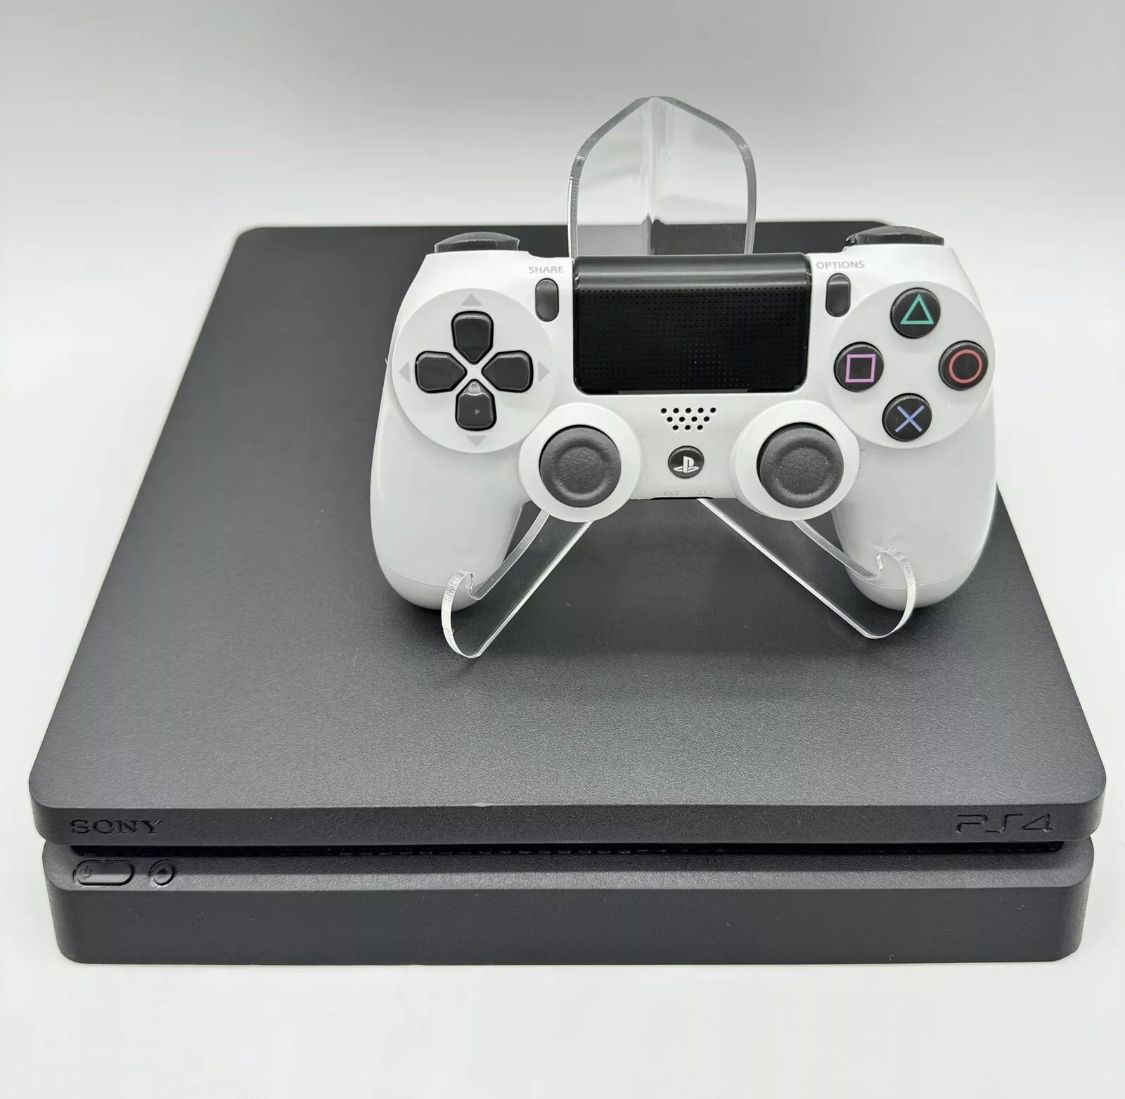 PlayStation 4 PS4 SLIM 1 TB WITH WIRES AND CONTROLLER